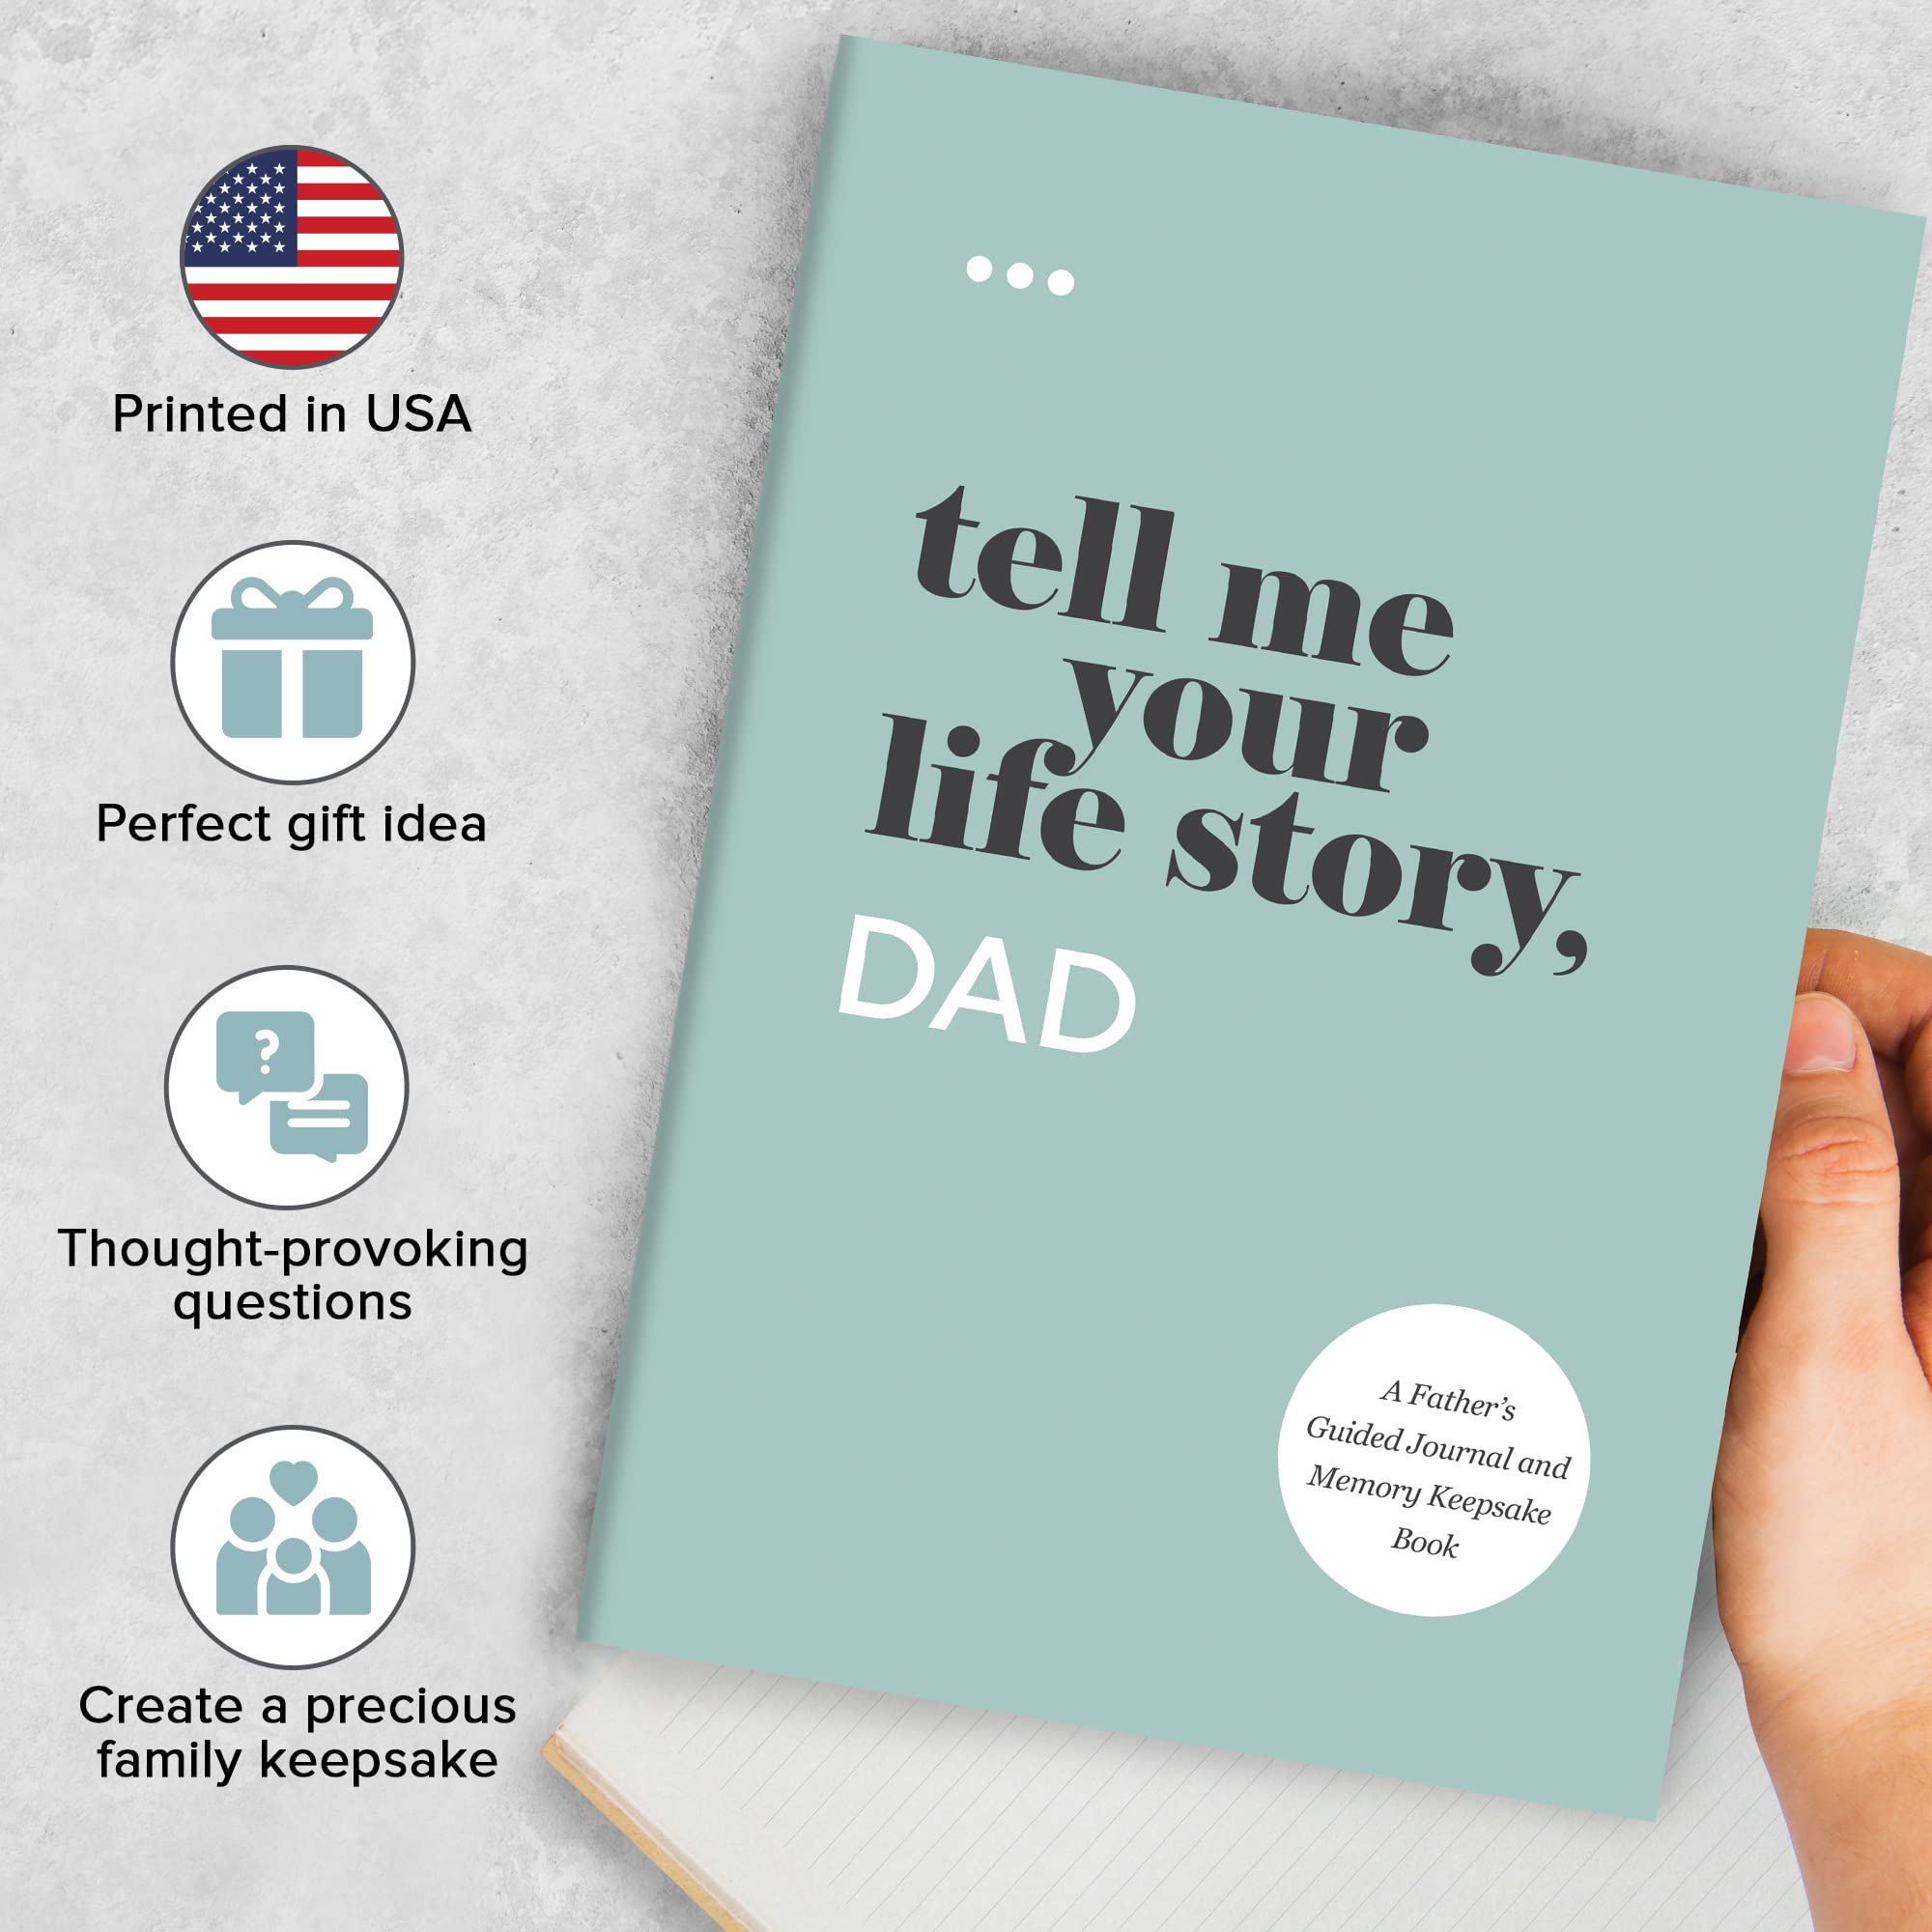 Tell Me Your Life Story, Dad: A Father’s Guided Journal and Memory Keepsake Book (Tell Me Your Life Story® Series Books)